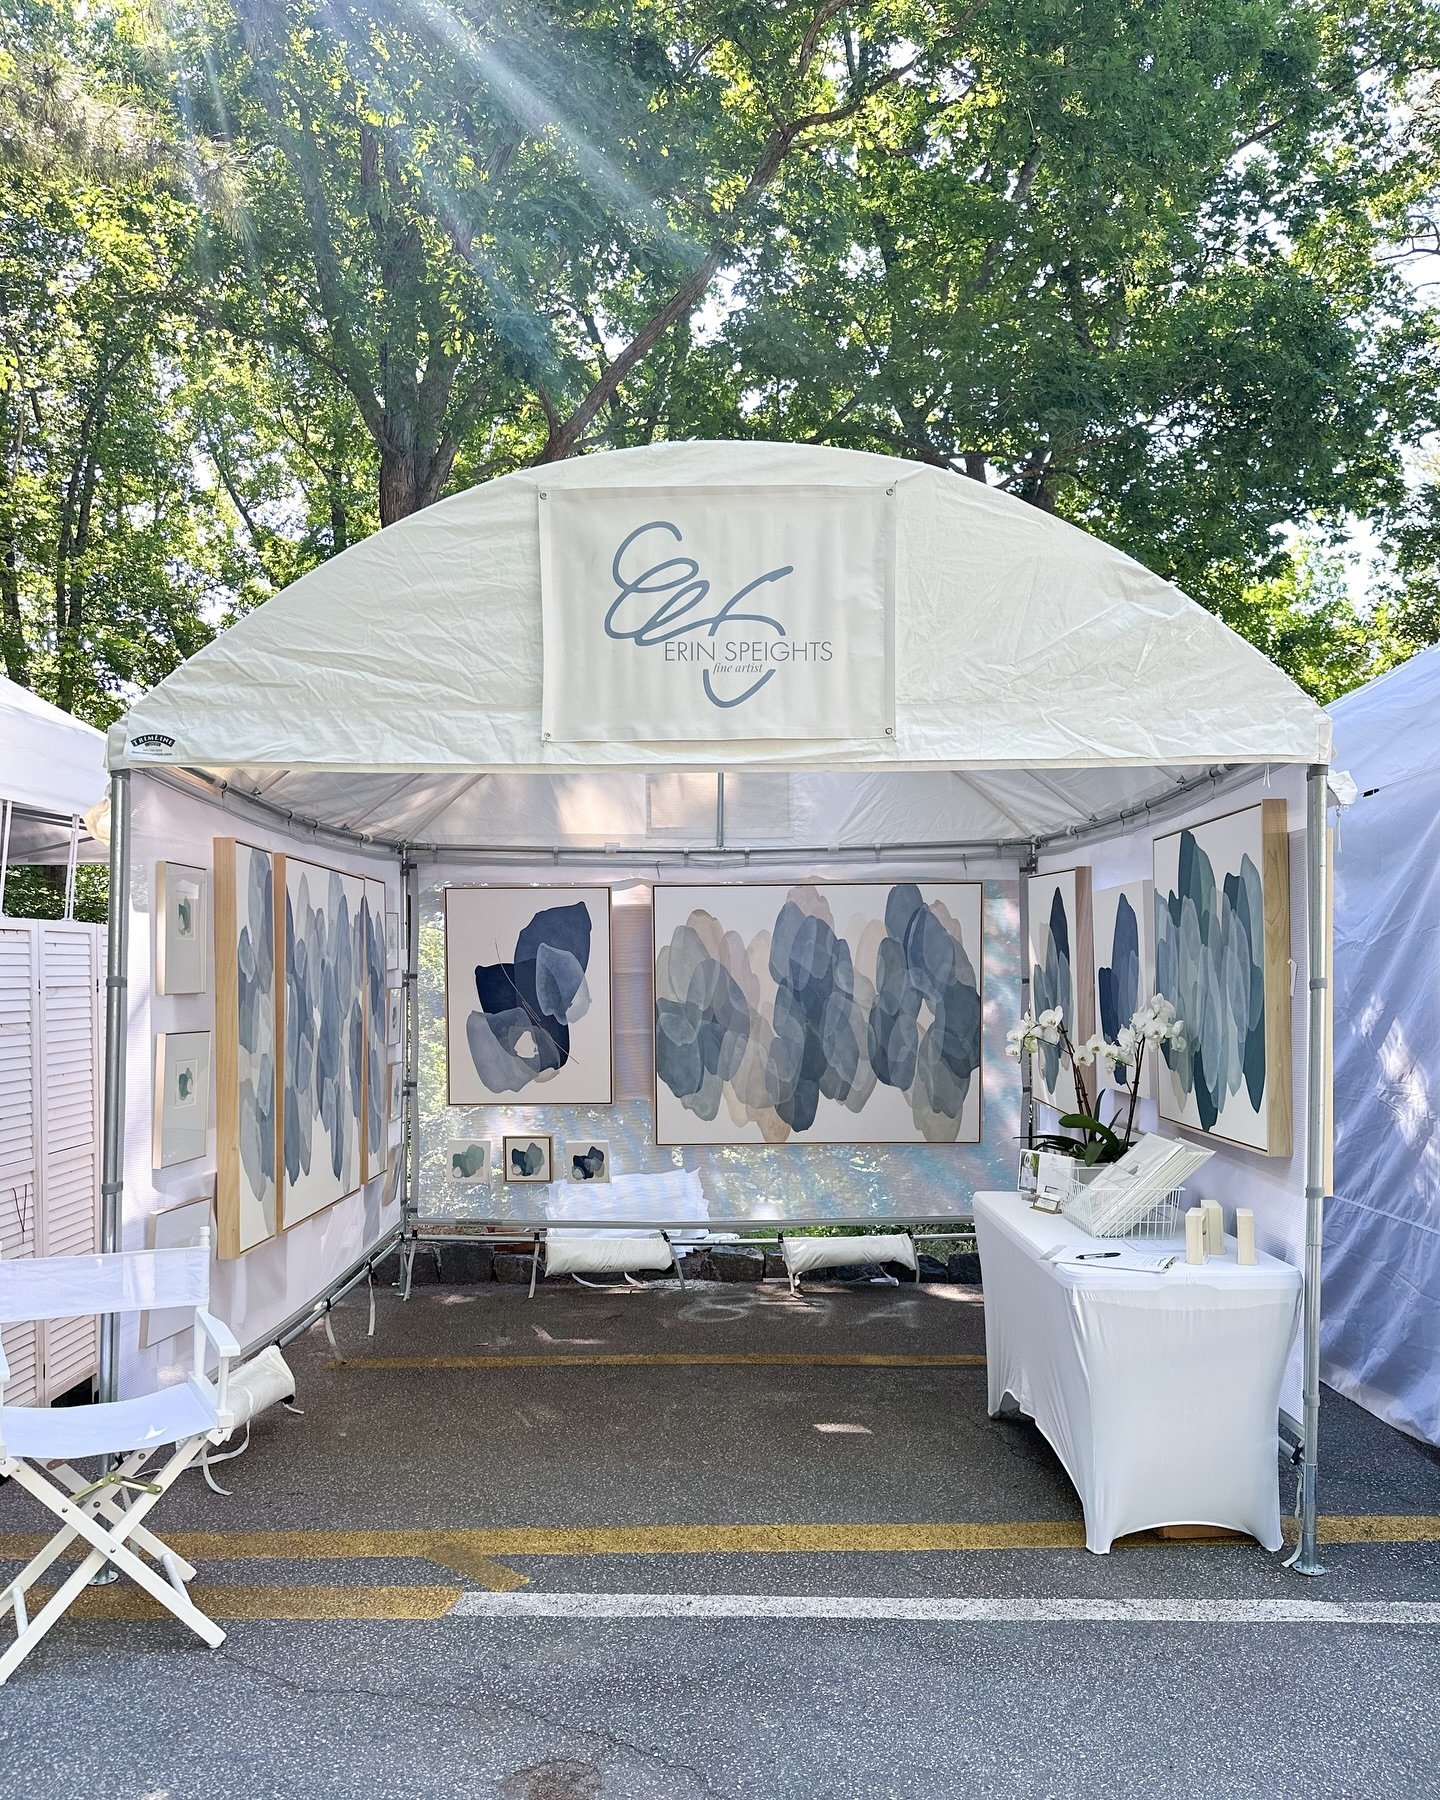 Come out and enjoy this gorgeous weather at The Chastain Park Art Festival! ☀️Several new pieces to choose from along, with gift cards for mom! Open today until 5pm and tomorrow 11-5pm! Booth 89A

See a piece you love but not in the area? Feel free t